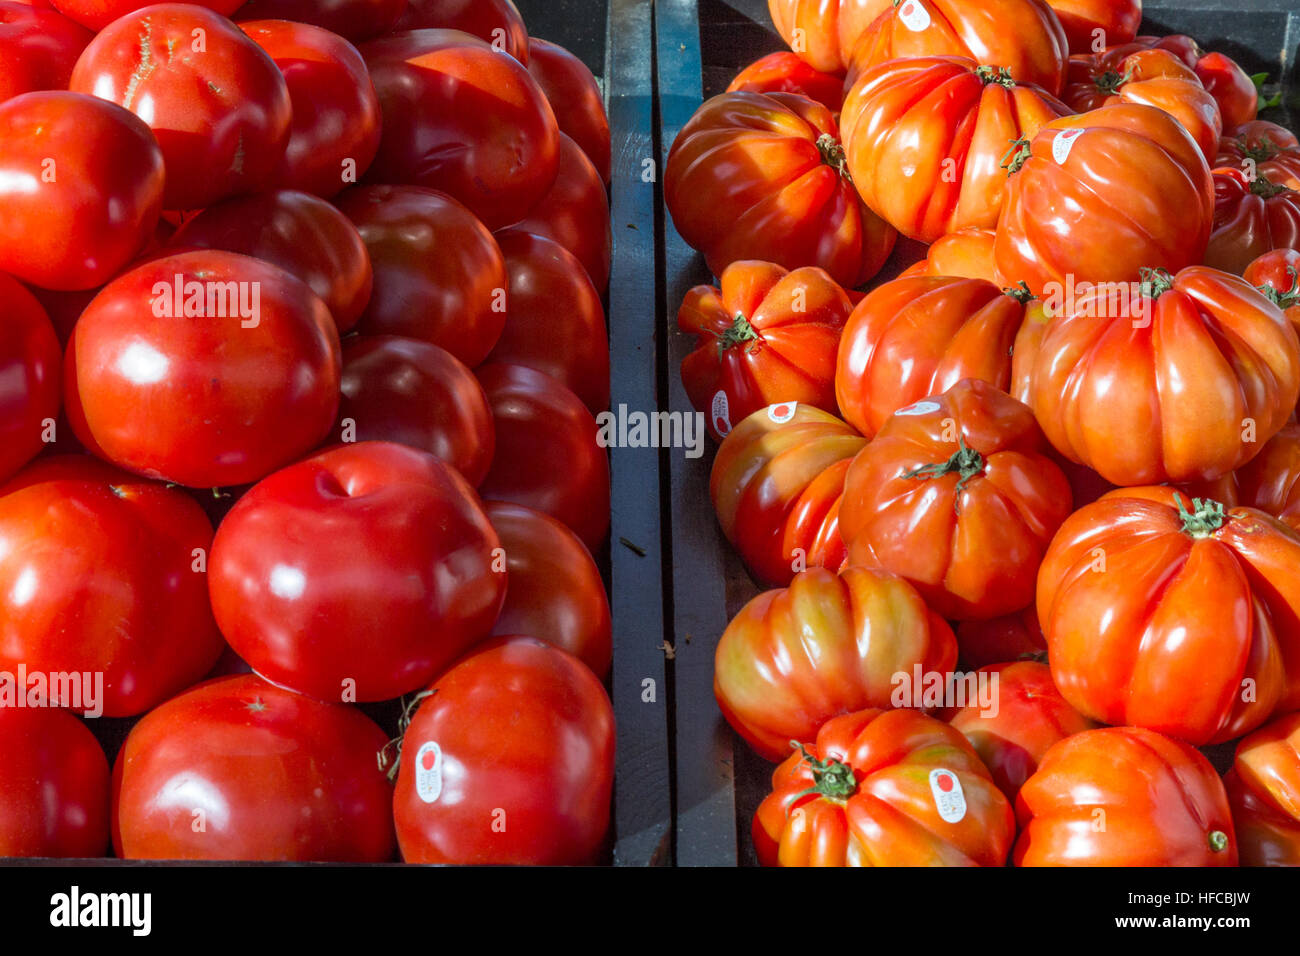 Normal tomatoes next to beefsteak tomatoes on Jean Talon Green Market in Montreal, QC, Canada Stock Photo